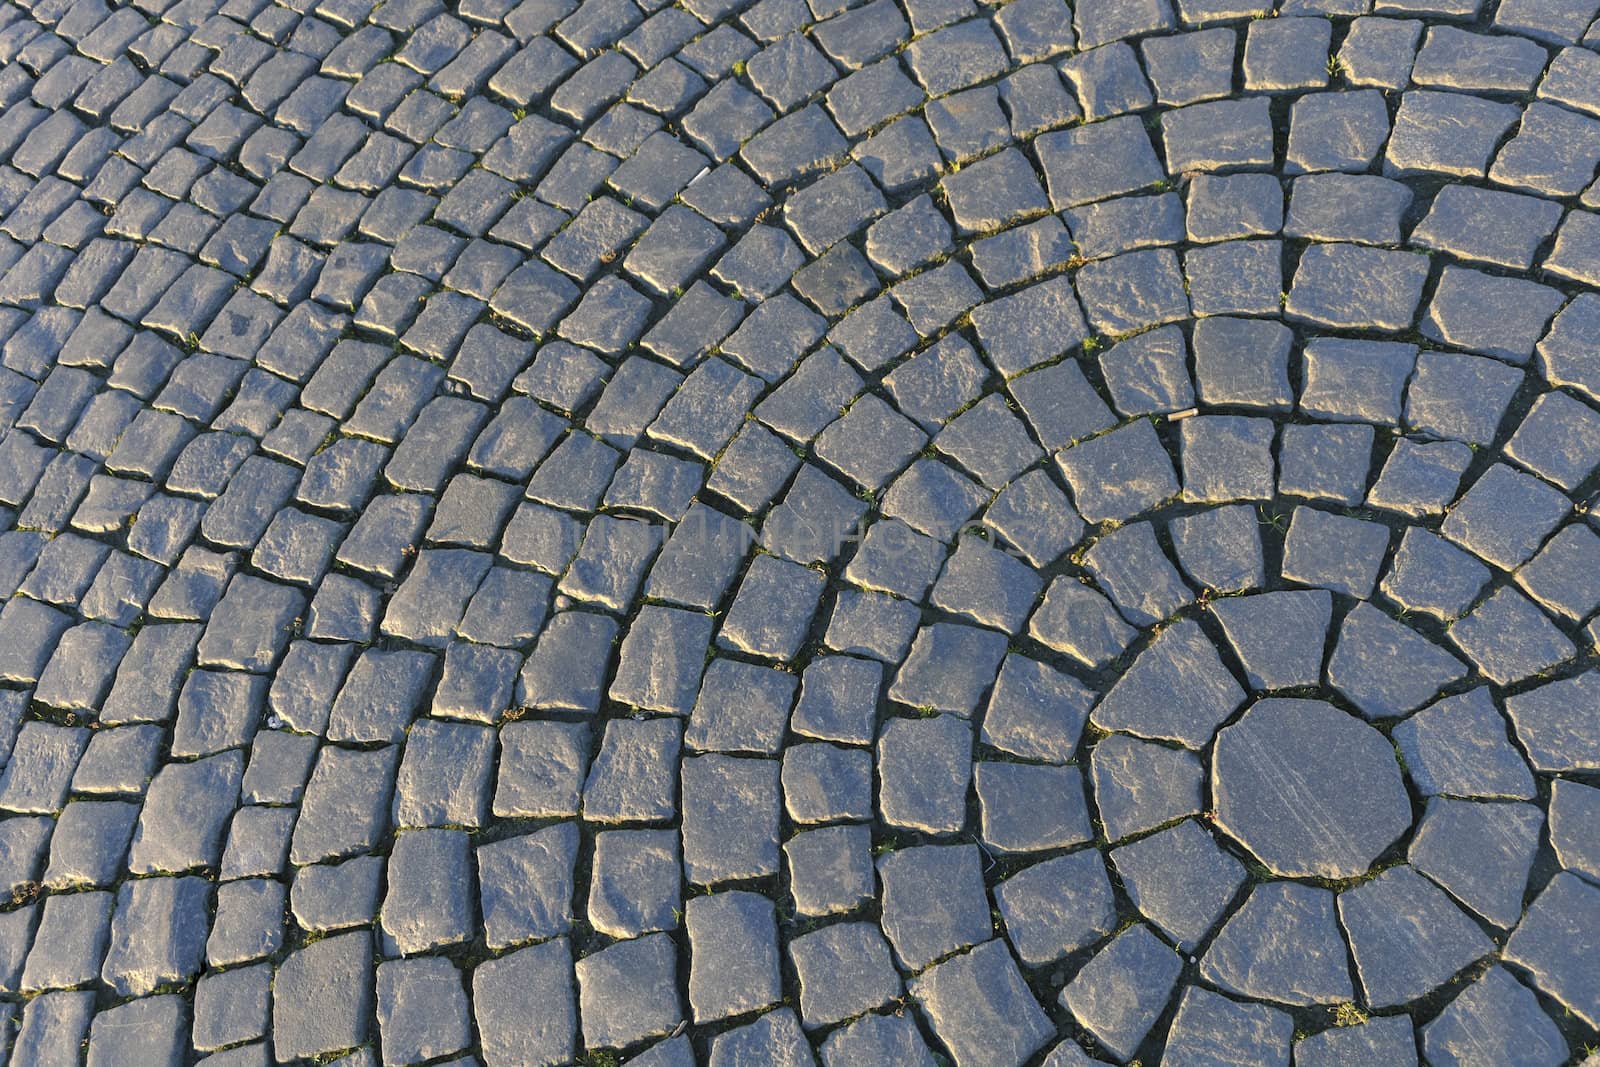 Circular detailed patterns of cobblestone make up Palace Square in St. Petersburg